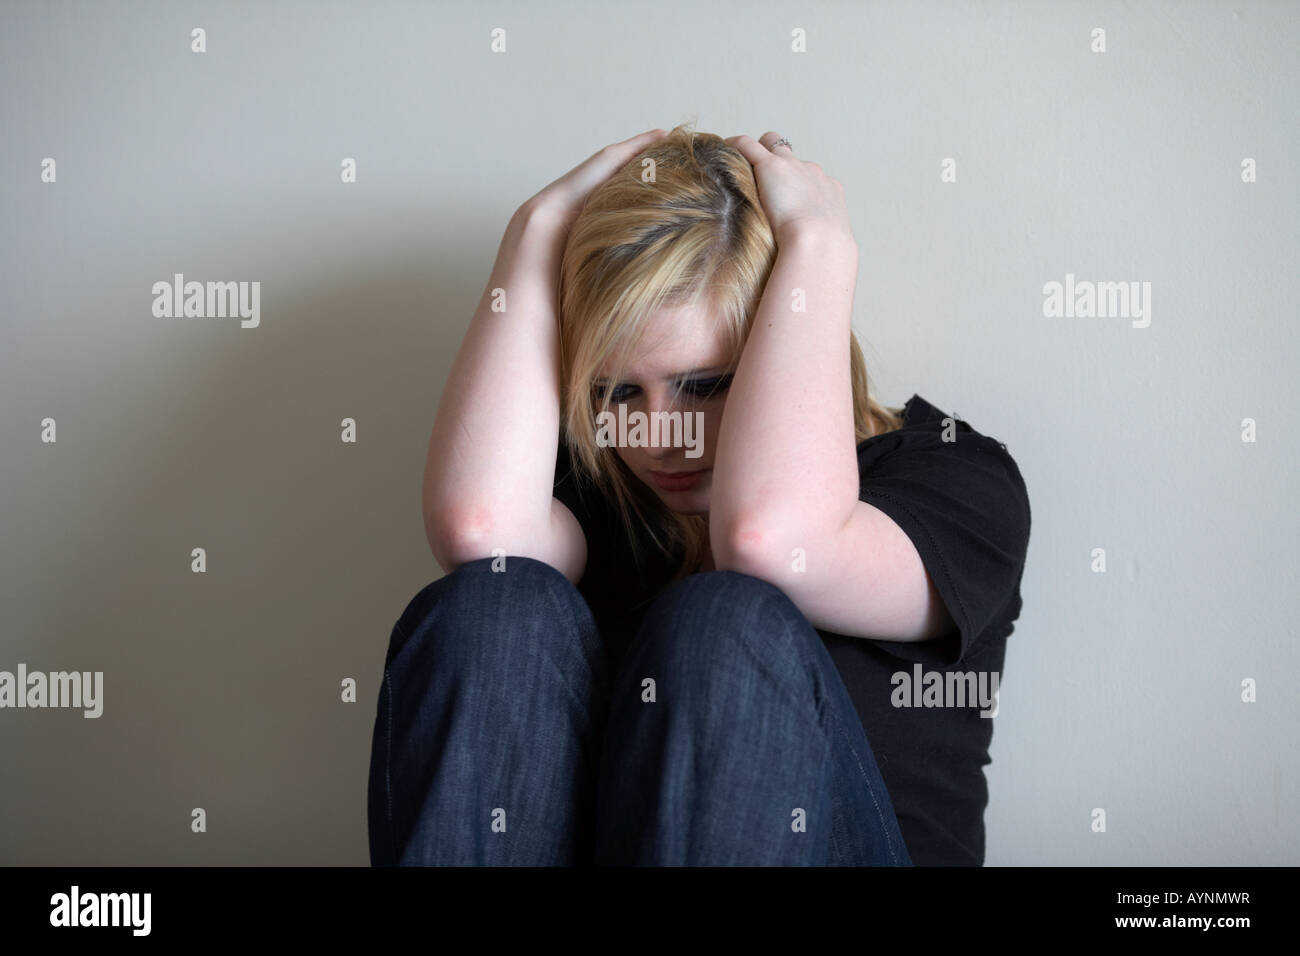 young blonde haired teenage woman sitting holding her head in her hands with her back against a wall Stock Photo